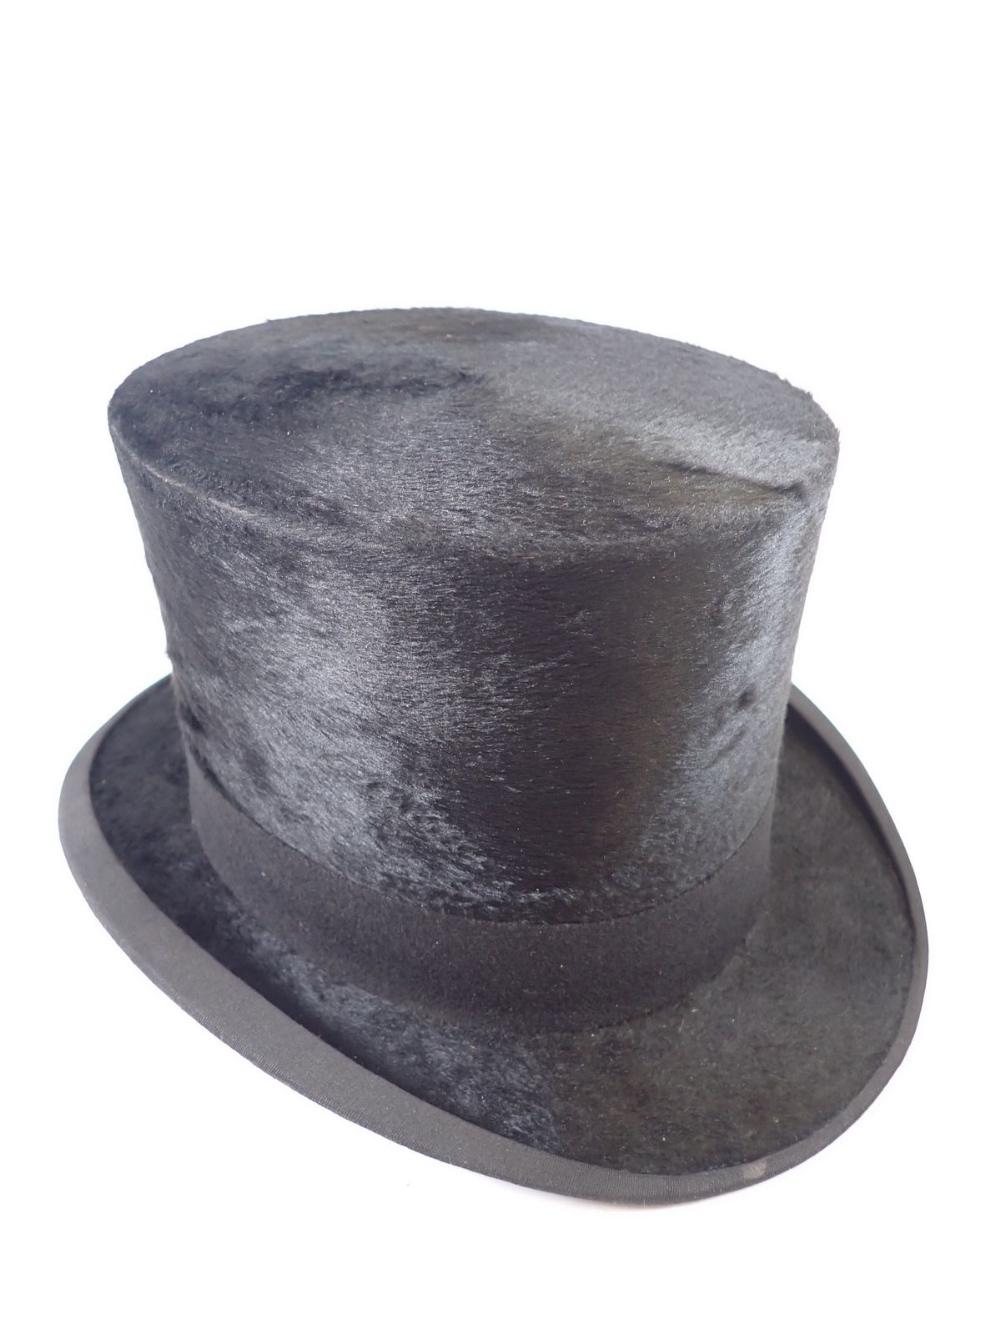 A Christy's silk top hat, size 7 1/8 in a 'Vulcanfibre' box - Image 2 of 3